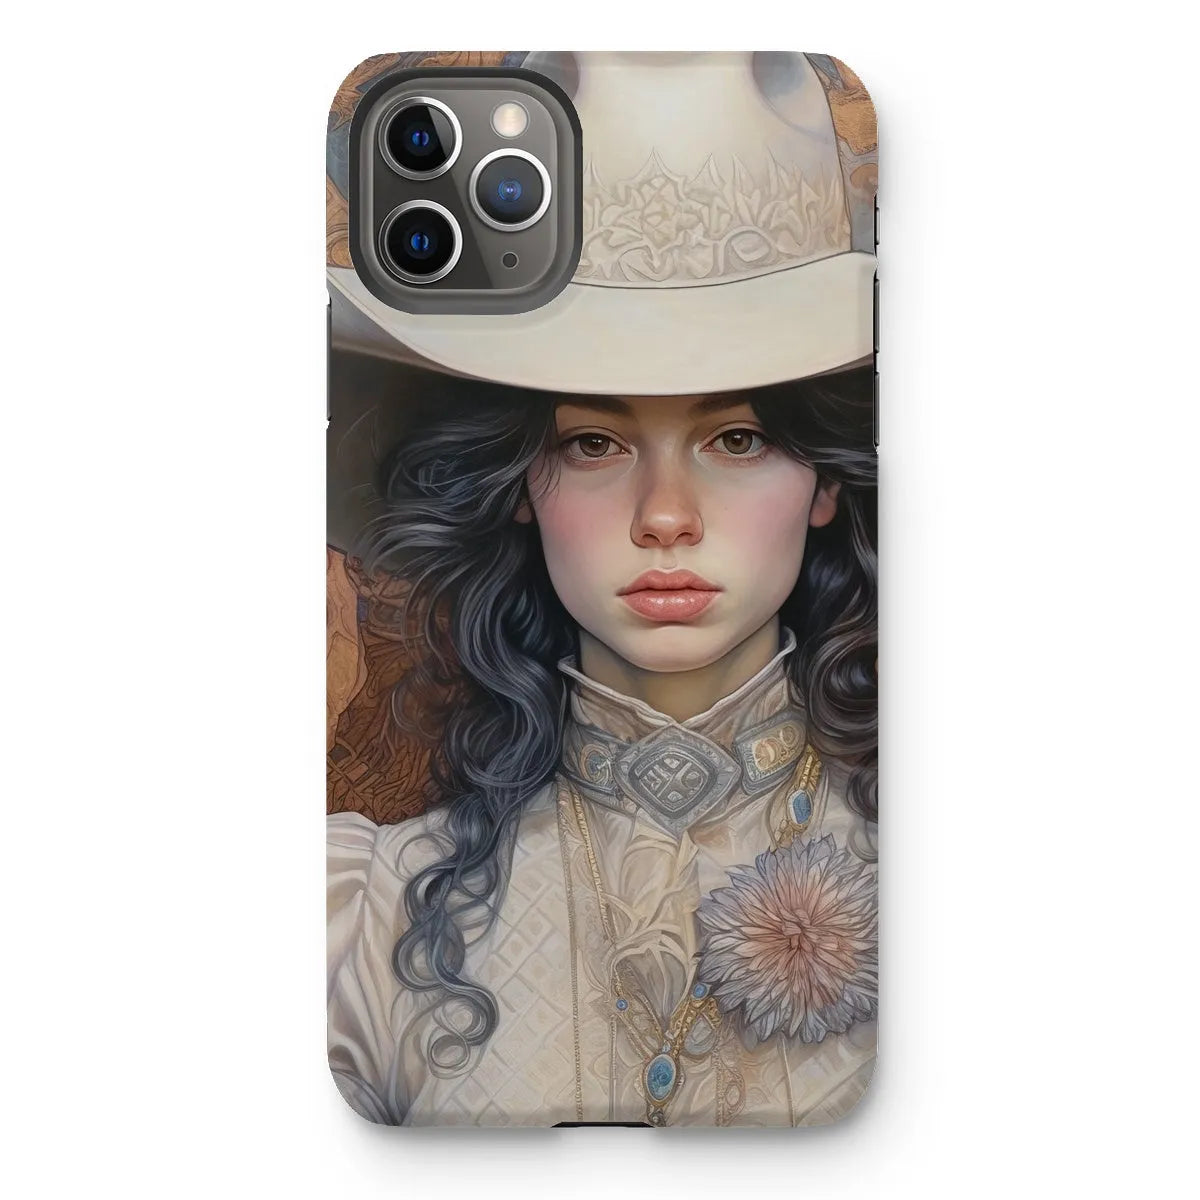 Helena The Lesbian Cowgirl - Sapphic Art Phone Case - Iphone 11 Pro Max / Matte - Mobile Phone Cases - Aesthetic Art